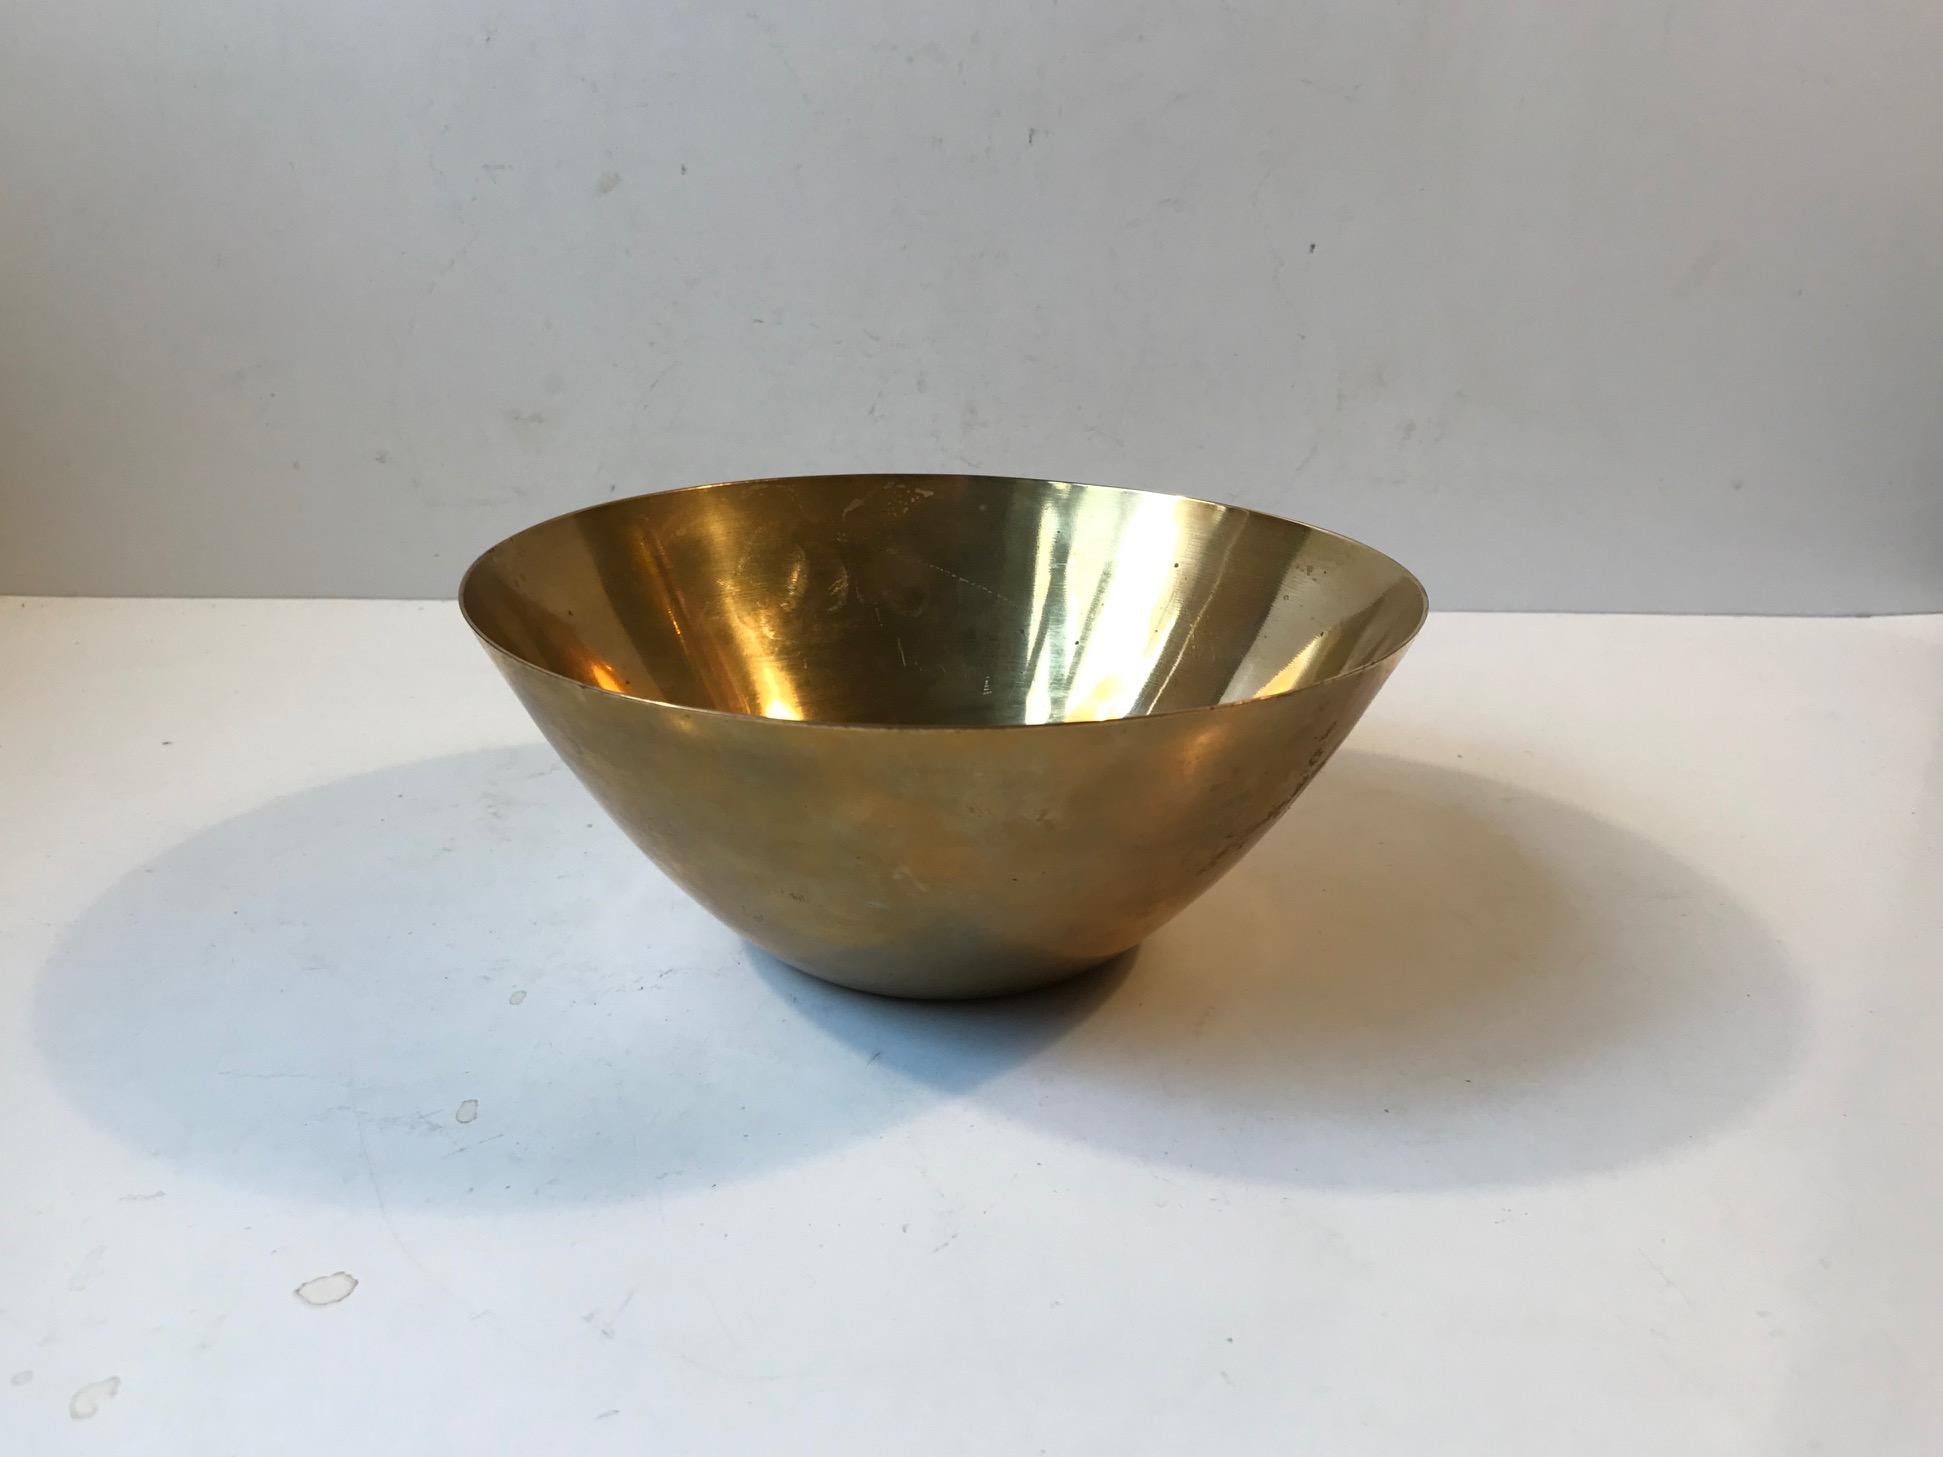 Rare medium sized turned brass bowl designed by Arne Jacobsenand manufactured by Stelton in Denmark. The brass line came as a limited follow-up on the cylinder line for SAS Hotel in Copenhagen and was launched only in Denmark in 1965 and possibly